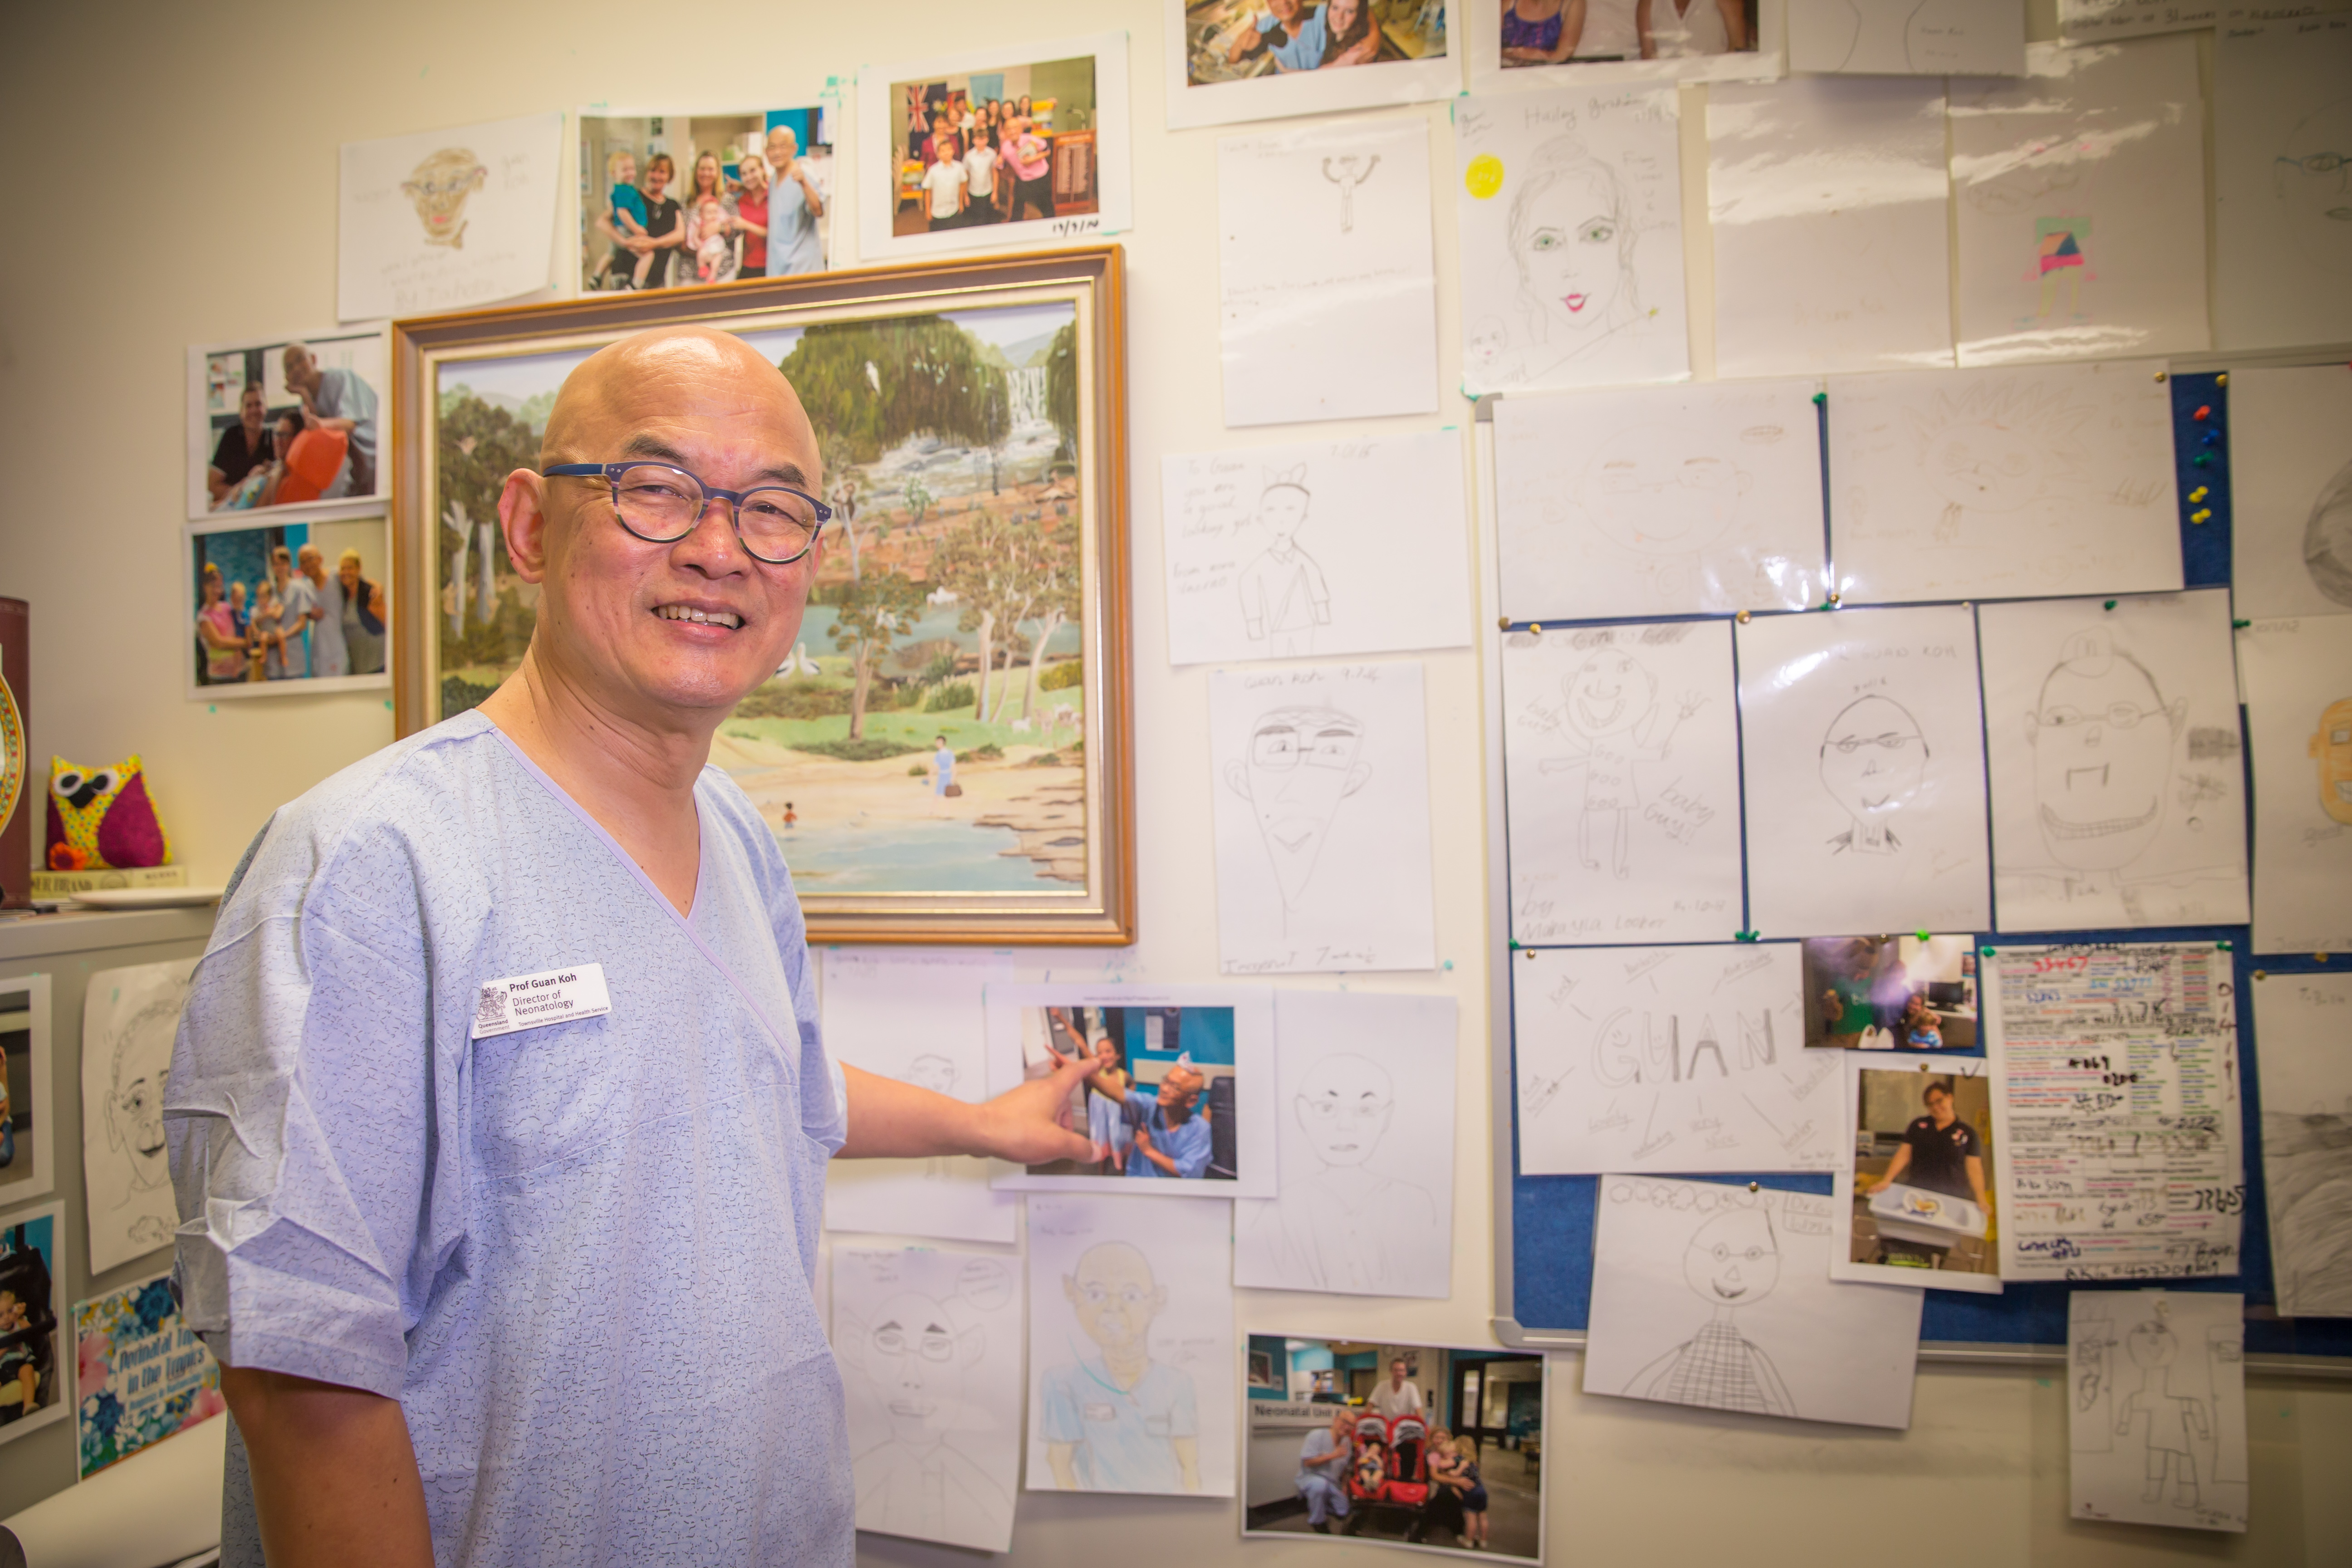 Professor Guan Koh saved Dr Godde as a child when an unlikely event brought them together again. 